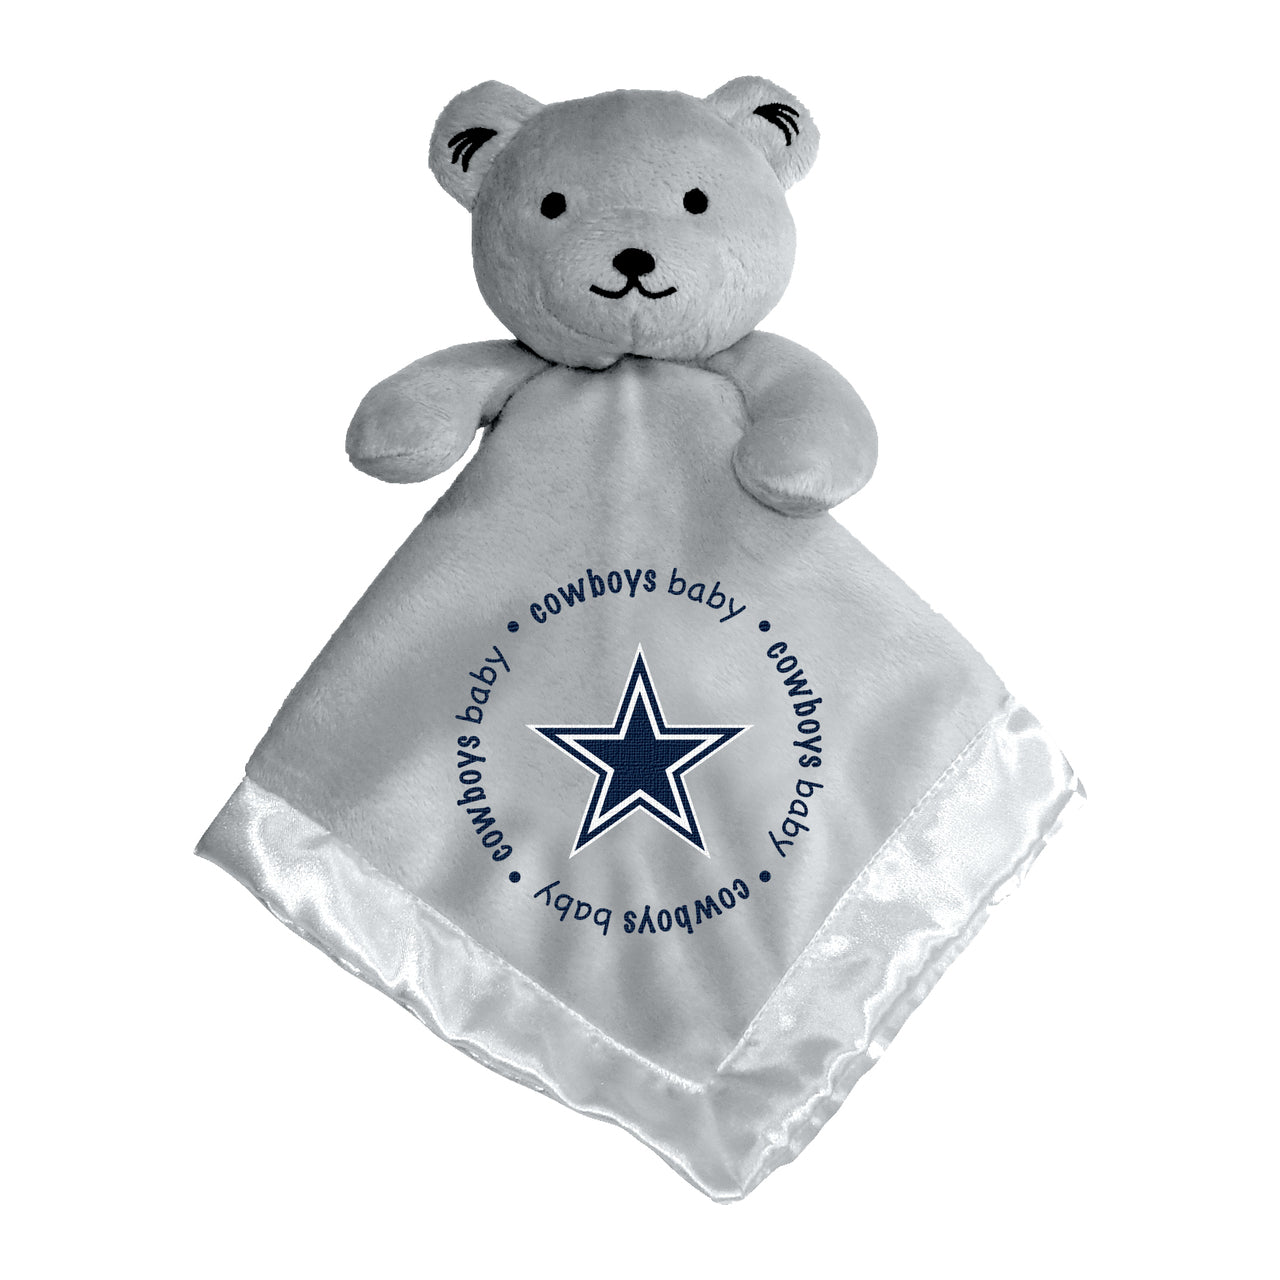 Dallas Cowboys Gray Embroidered Security Bear by Masterpieces Inc.